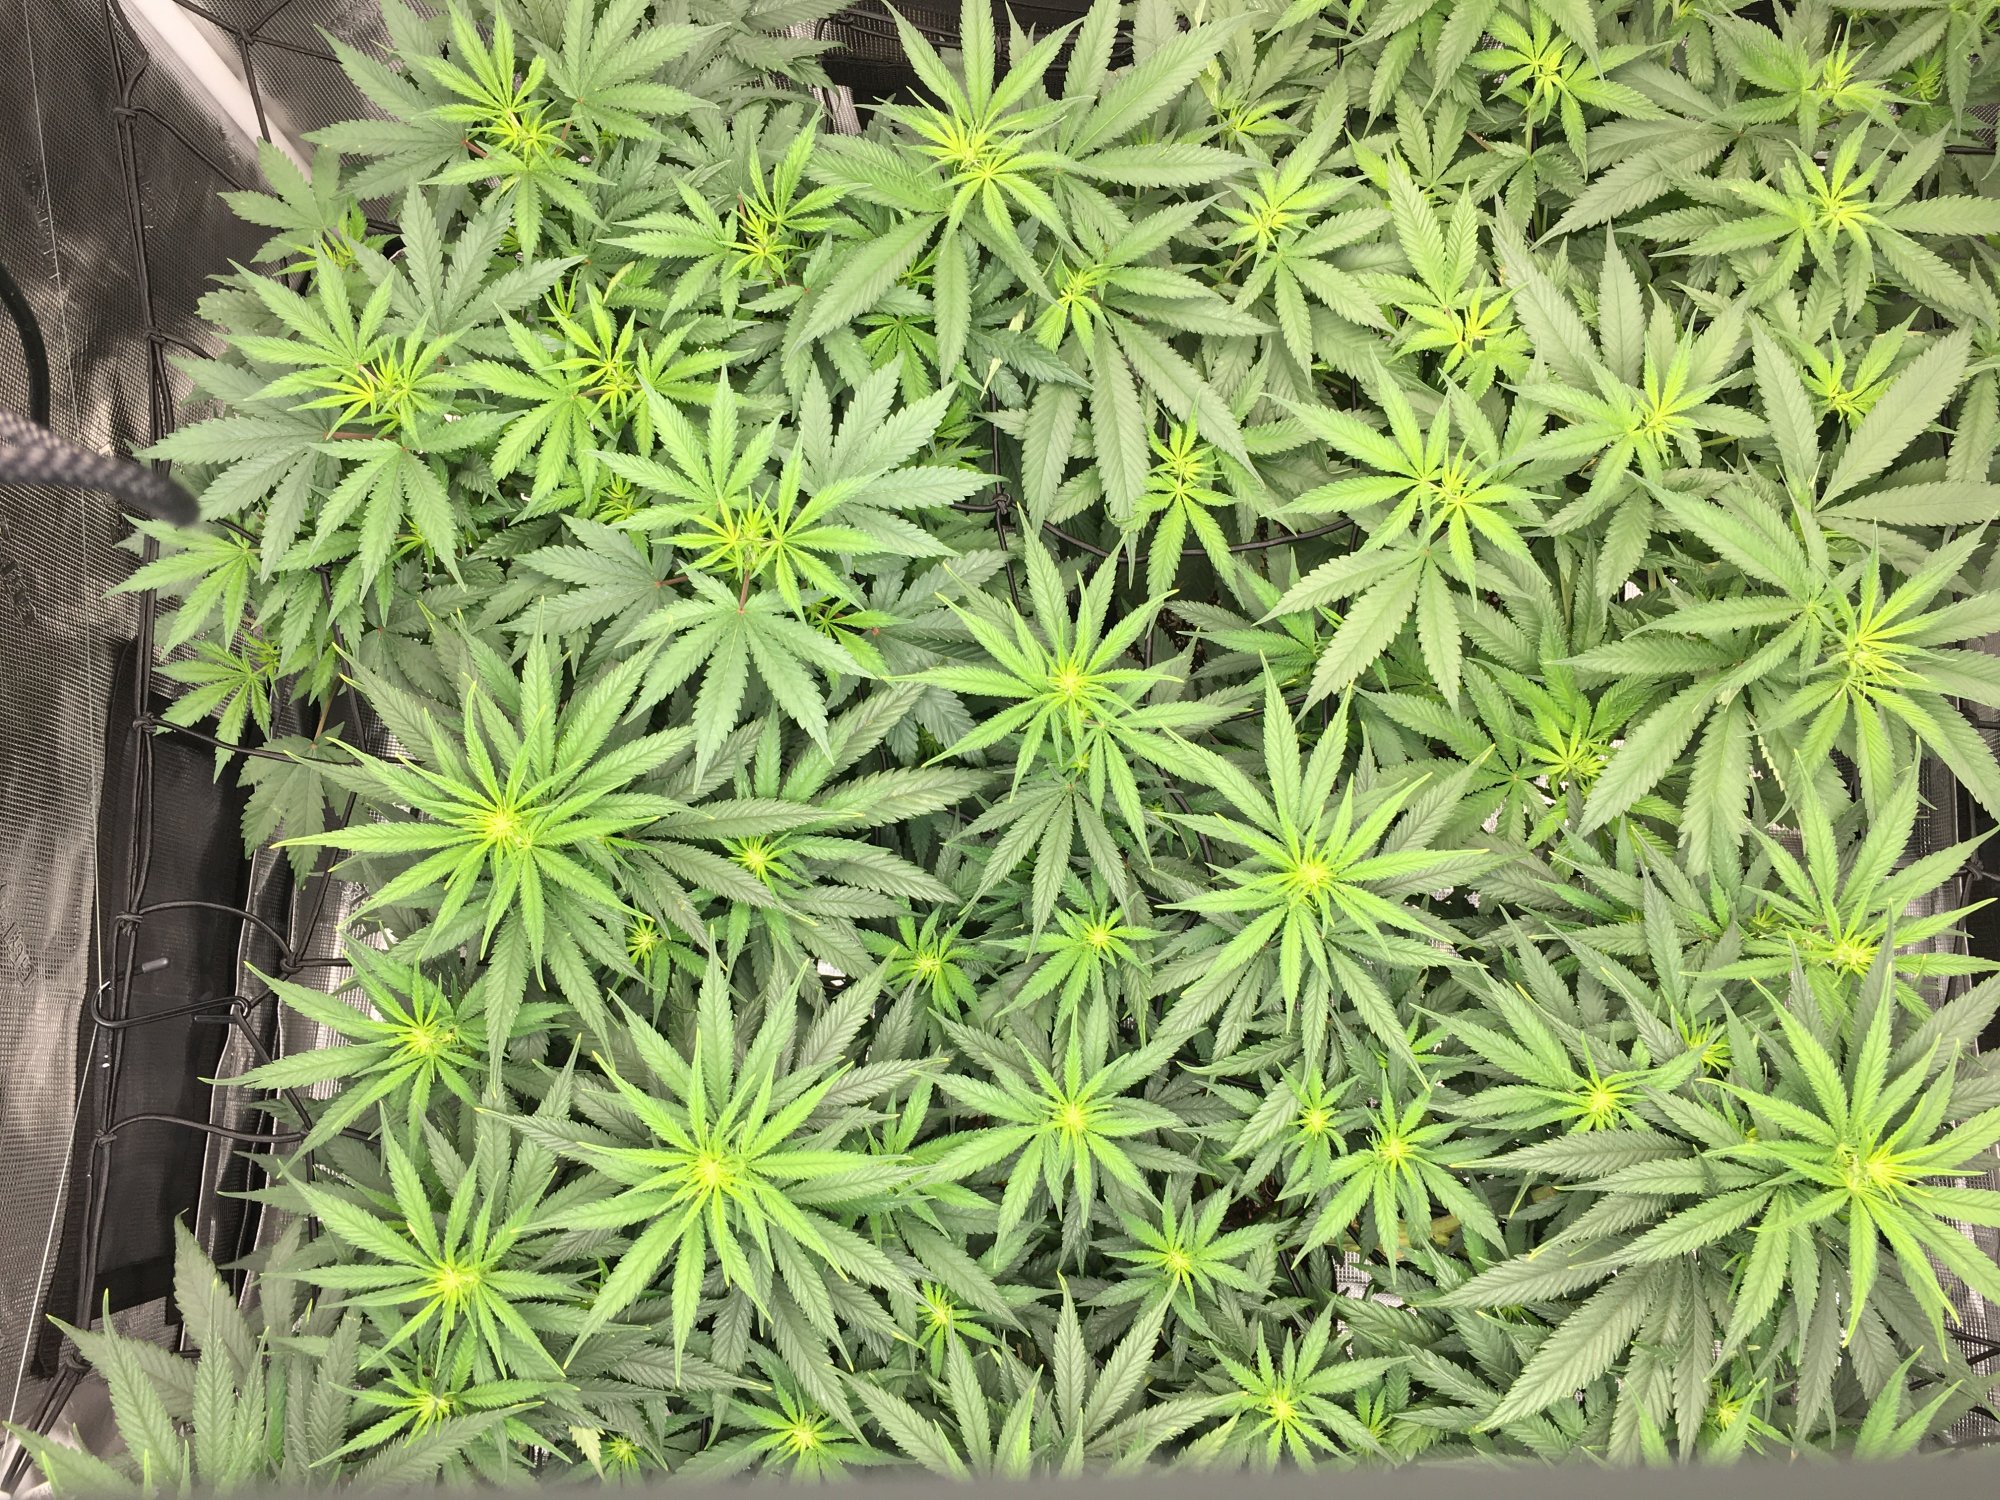 Mixing nutes during flower in soil 2